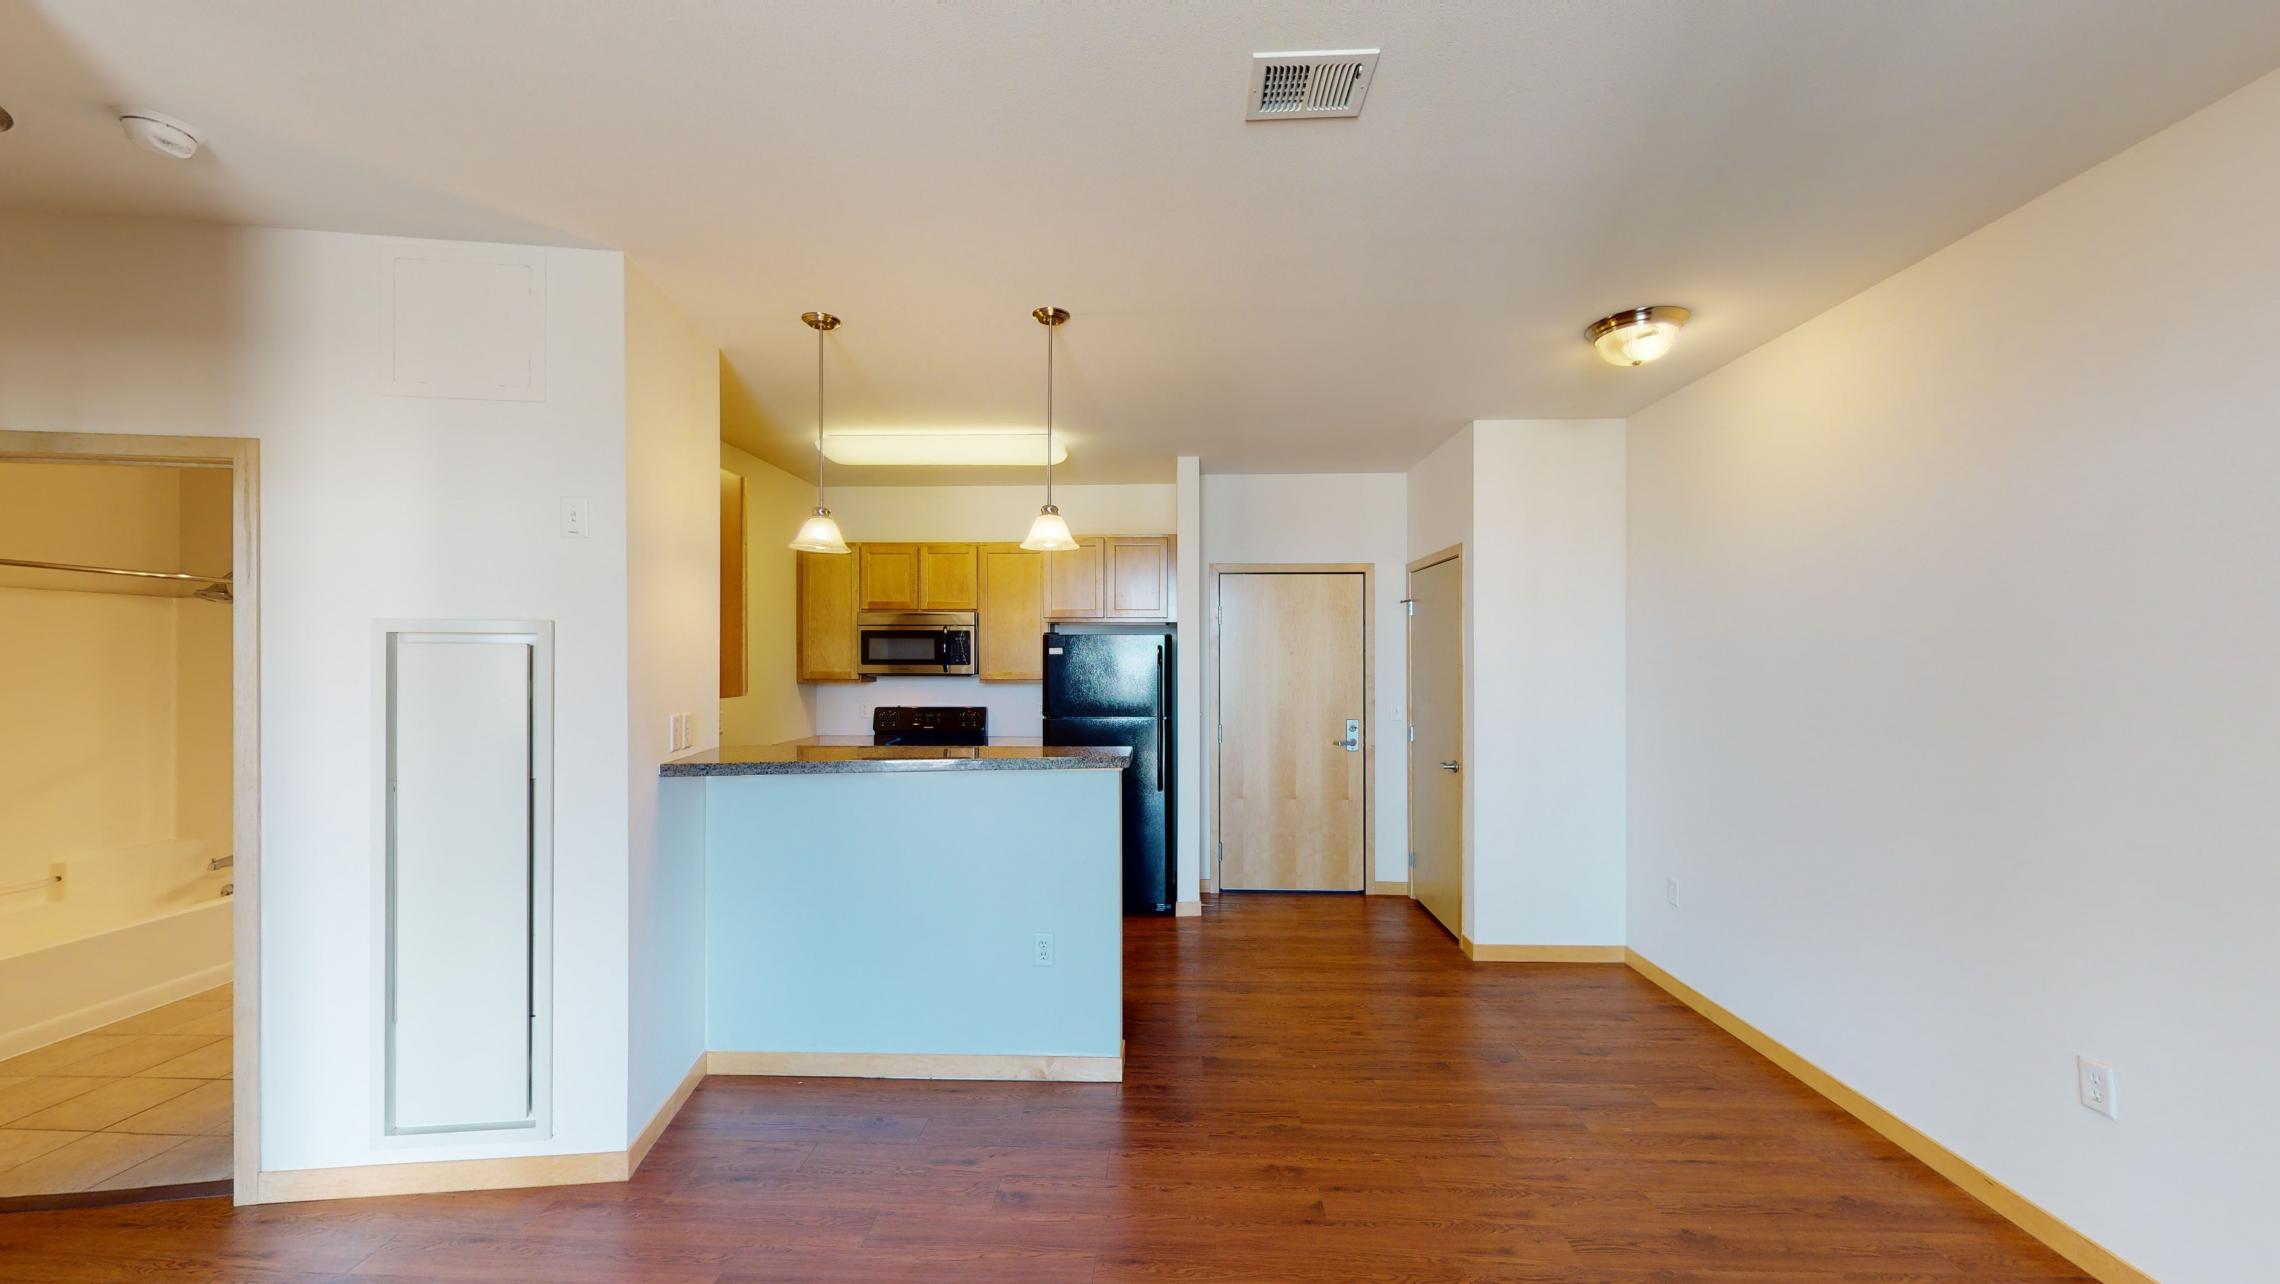 The-Depot-Apartment-1-314-One-Bedroom-Kitchen-Living-Bathroom-Storgae-Bathtub-Rooftop-Terrace-Fitness-Downtown-Madison-Capitol-Bike-Trails-Cats-Lifestyle-City-Lake